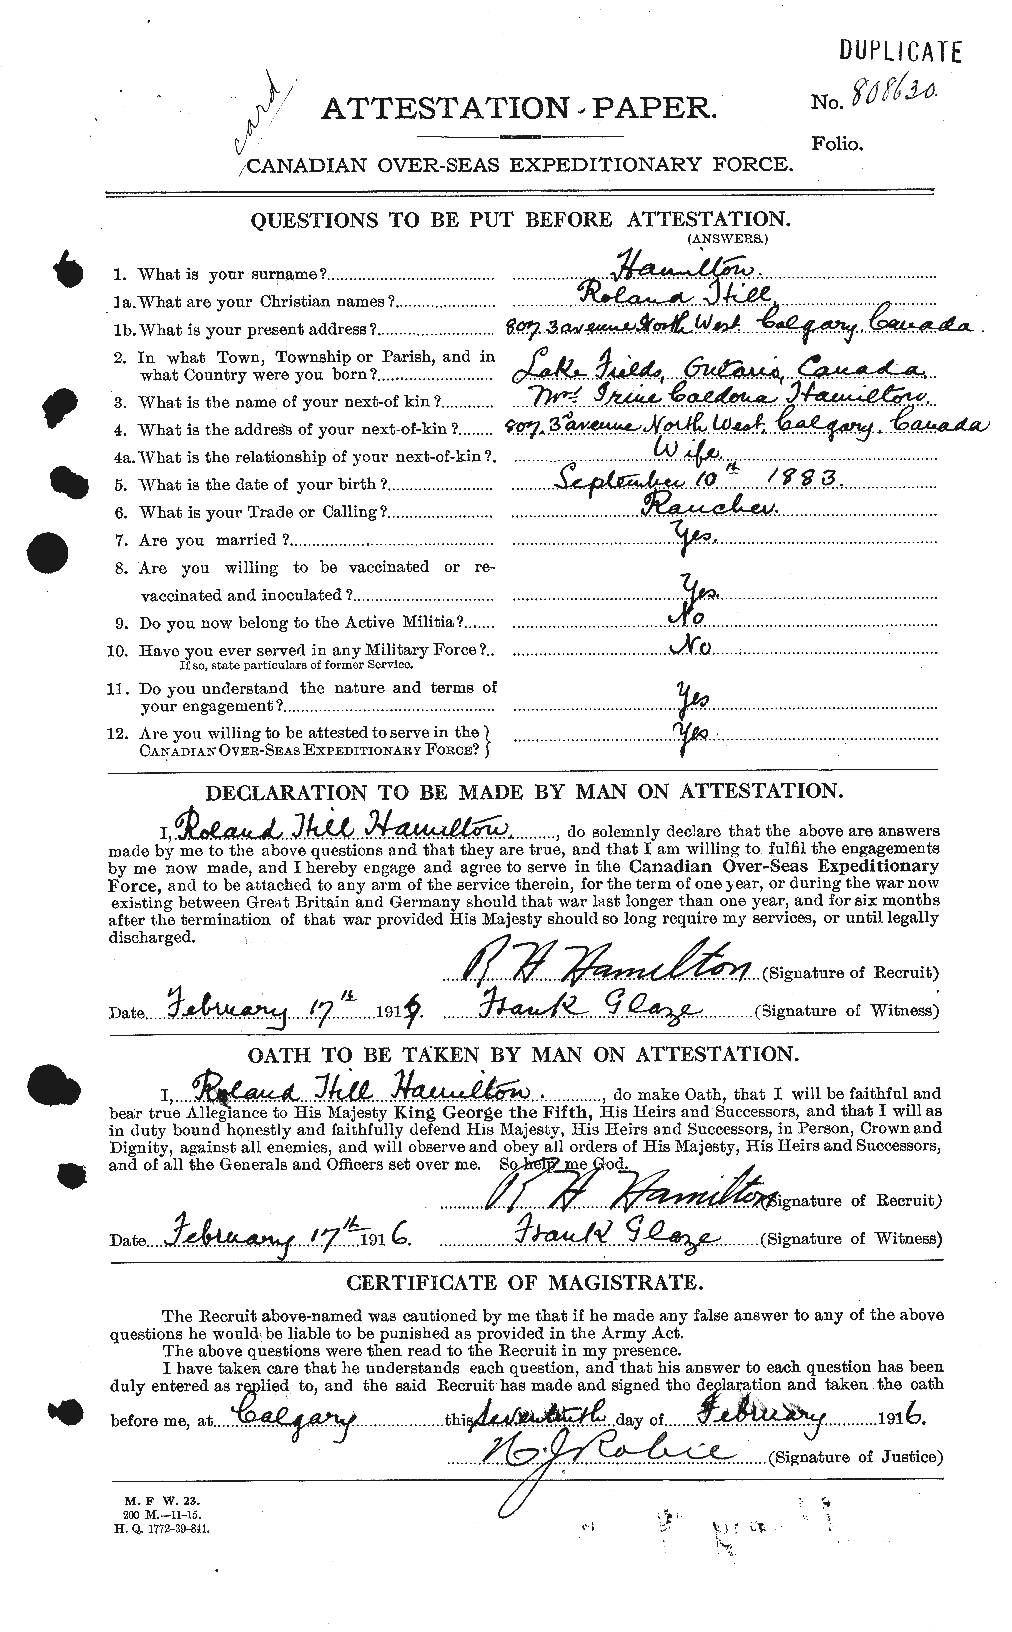 Personnel Records of the First World War - CEF 373282a